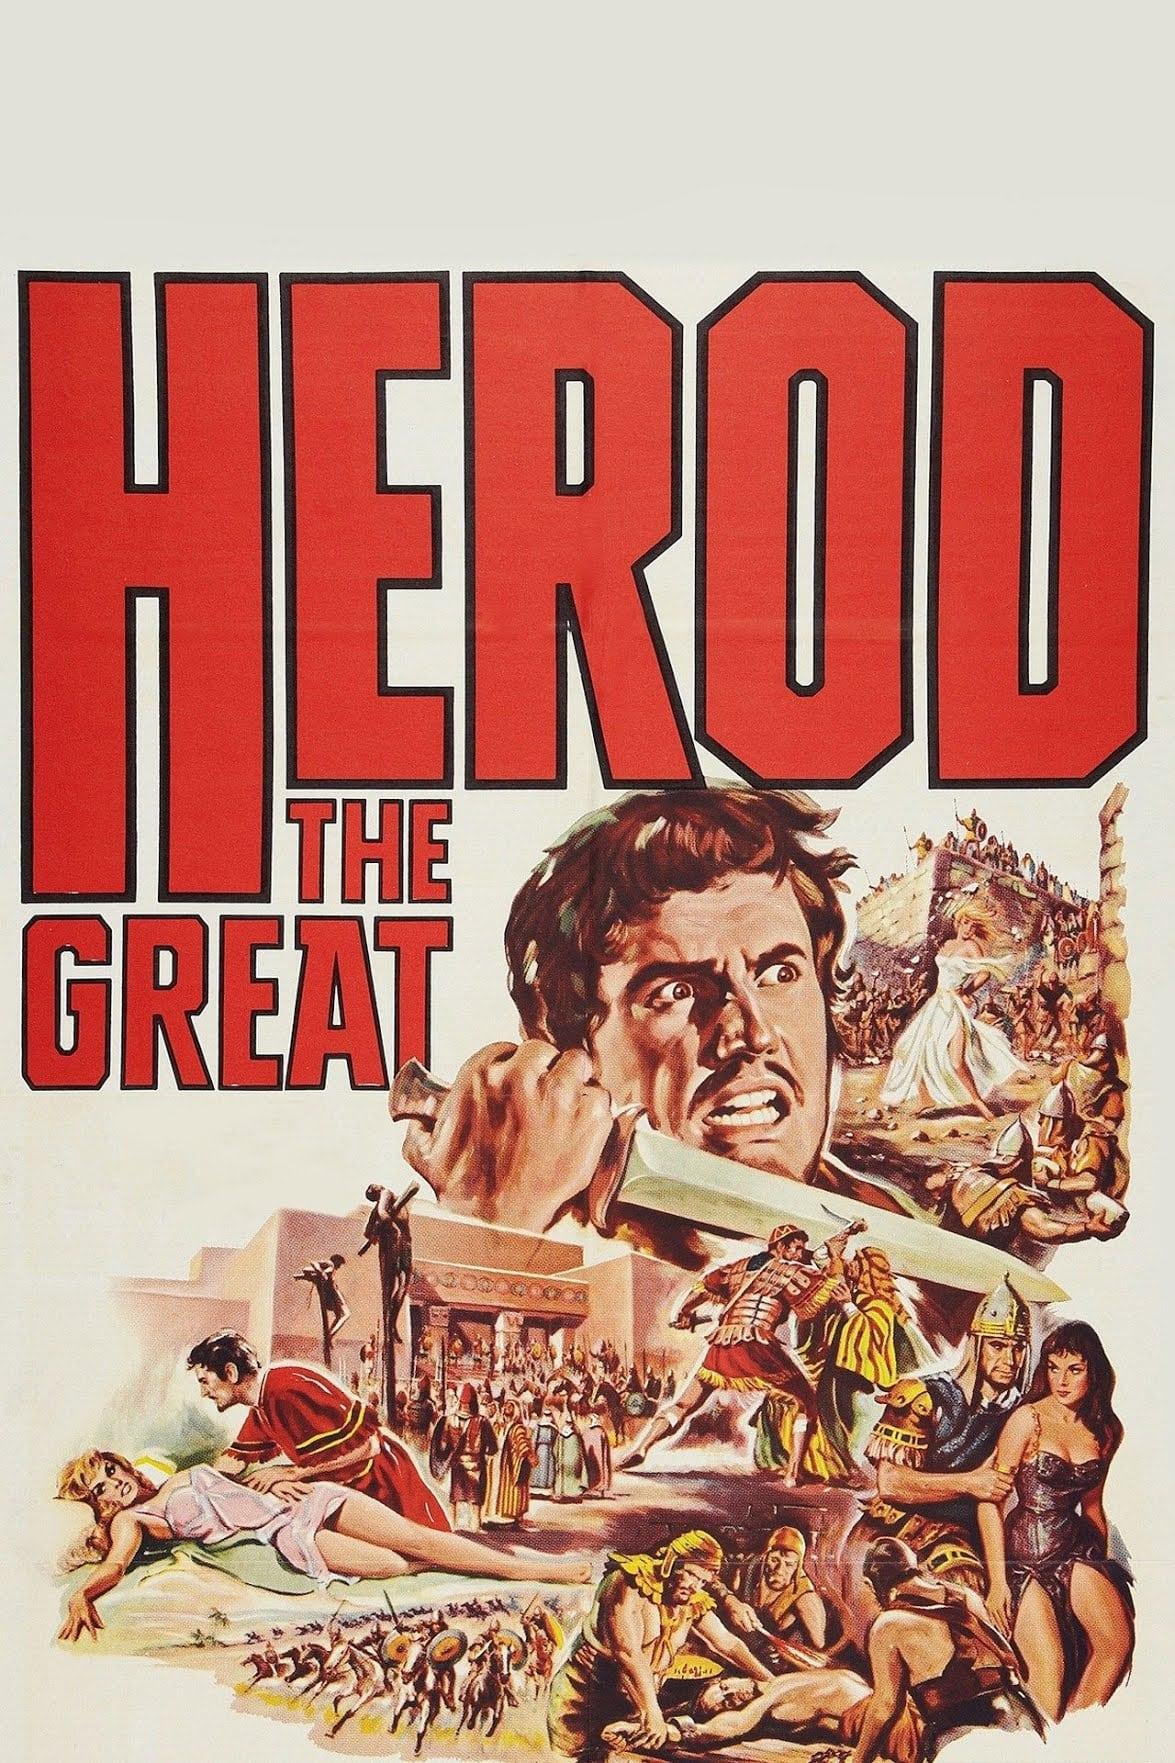 Herod the Great poster